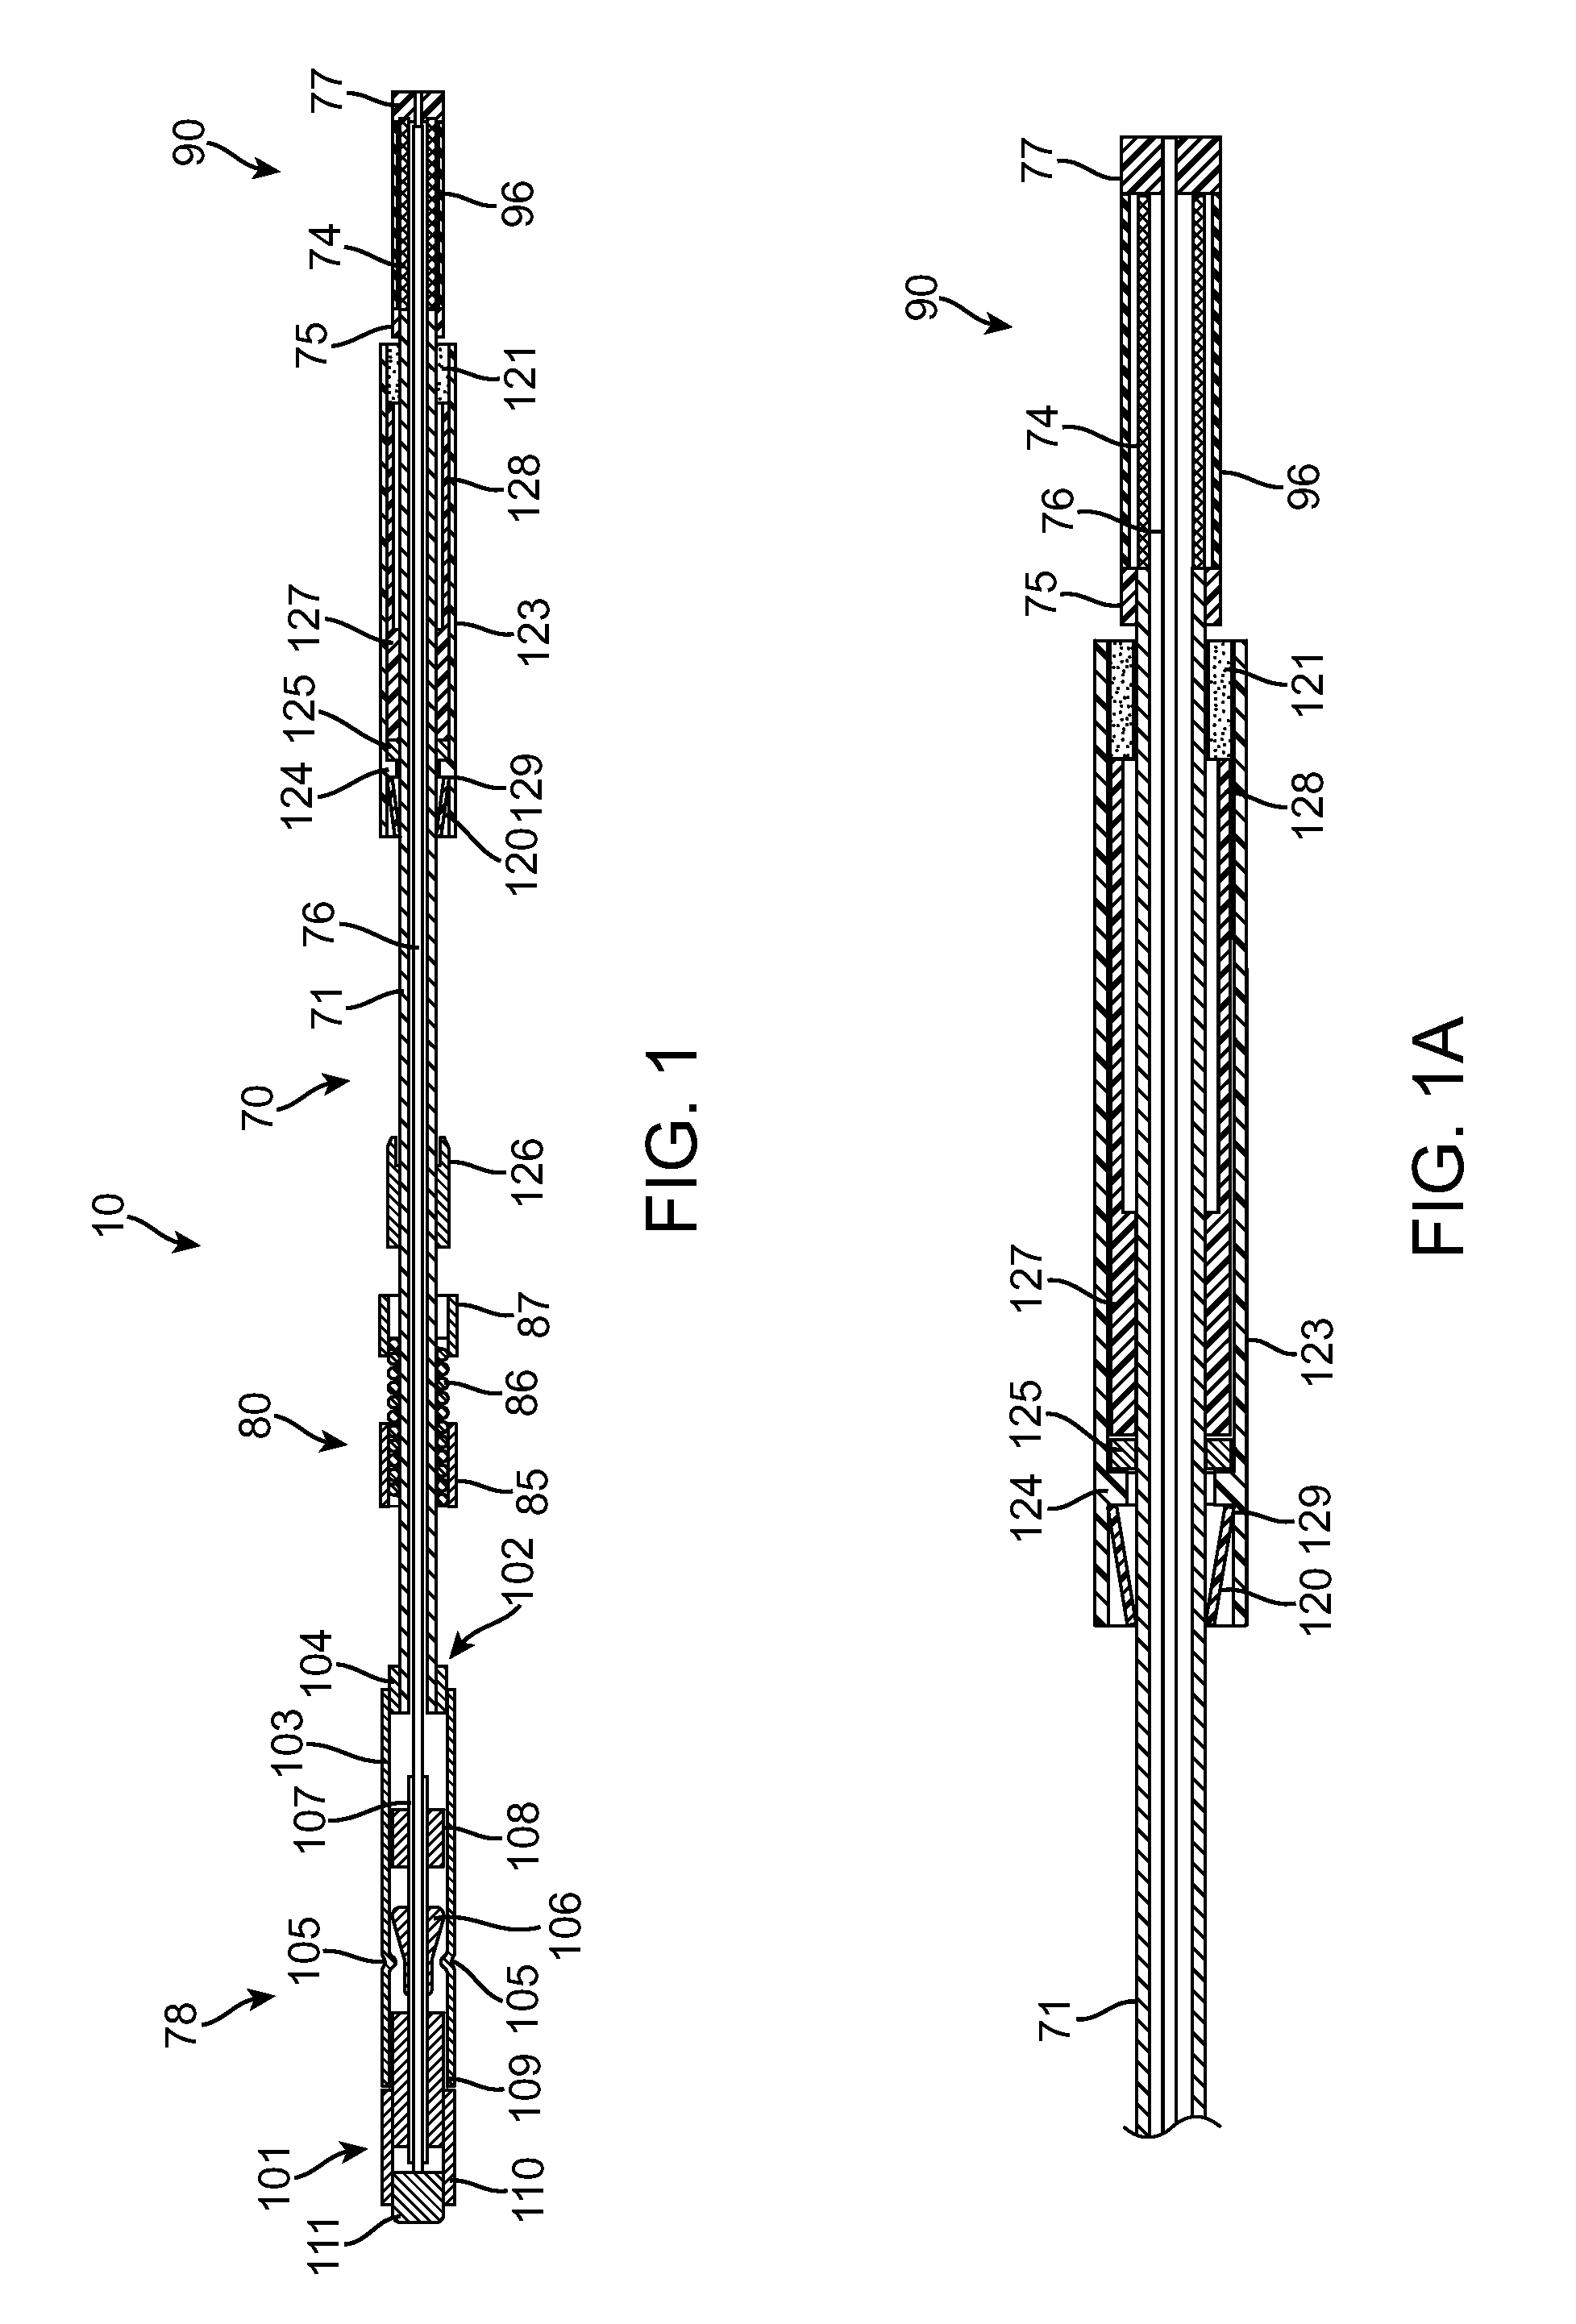 Apparatus and methods for delivering hemostatic materials for blood vessel closure